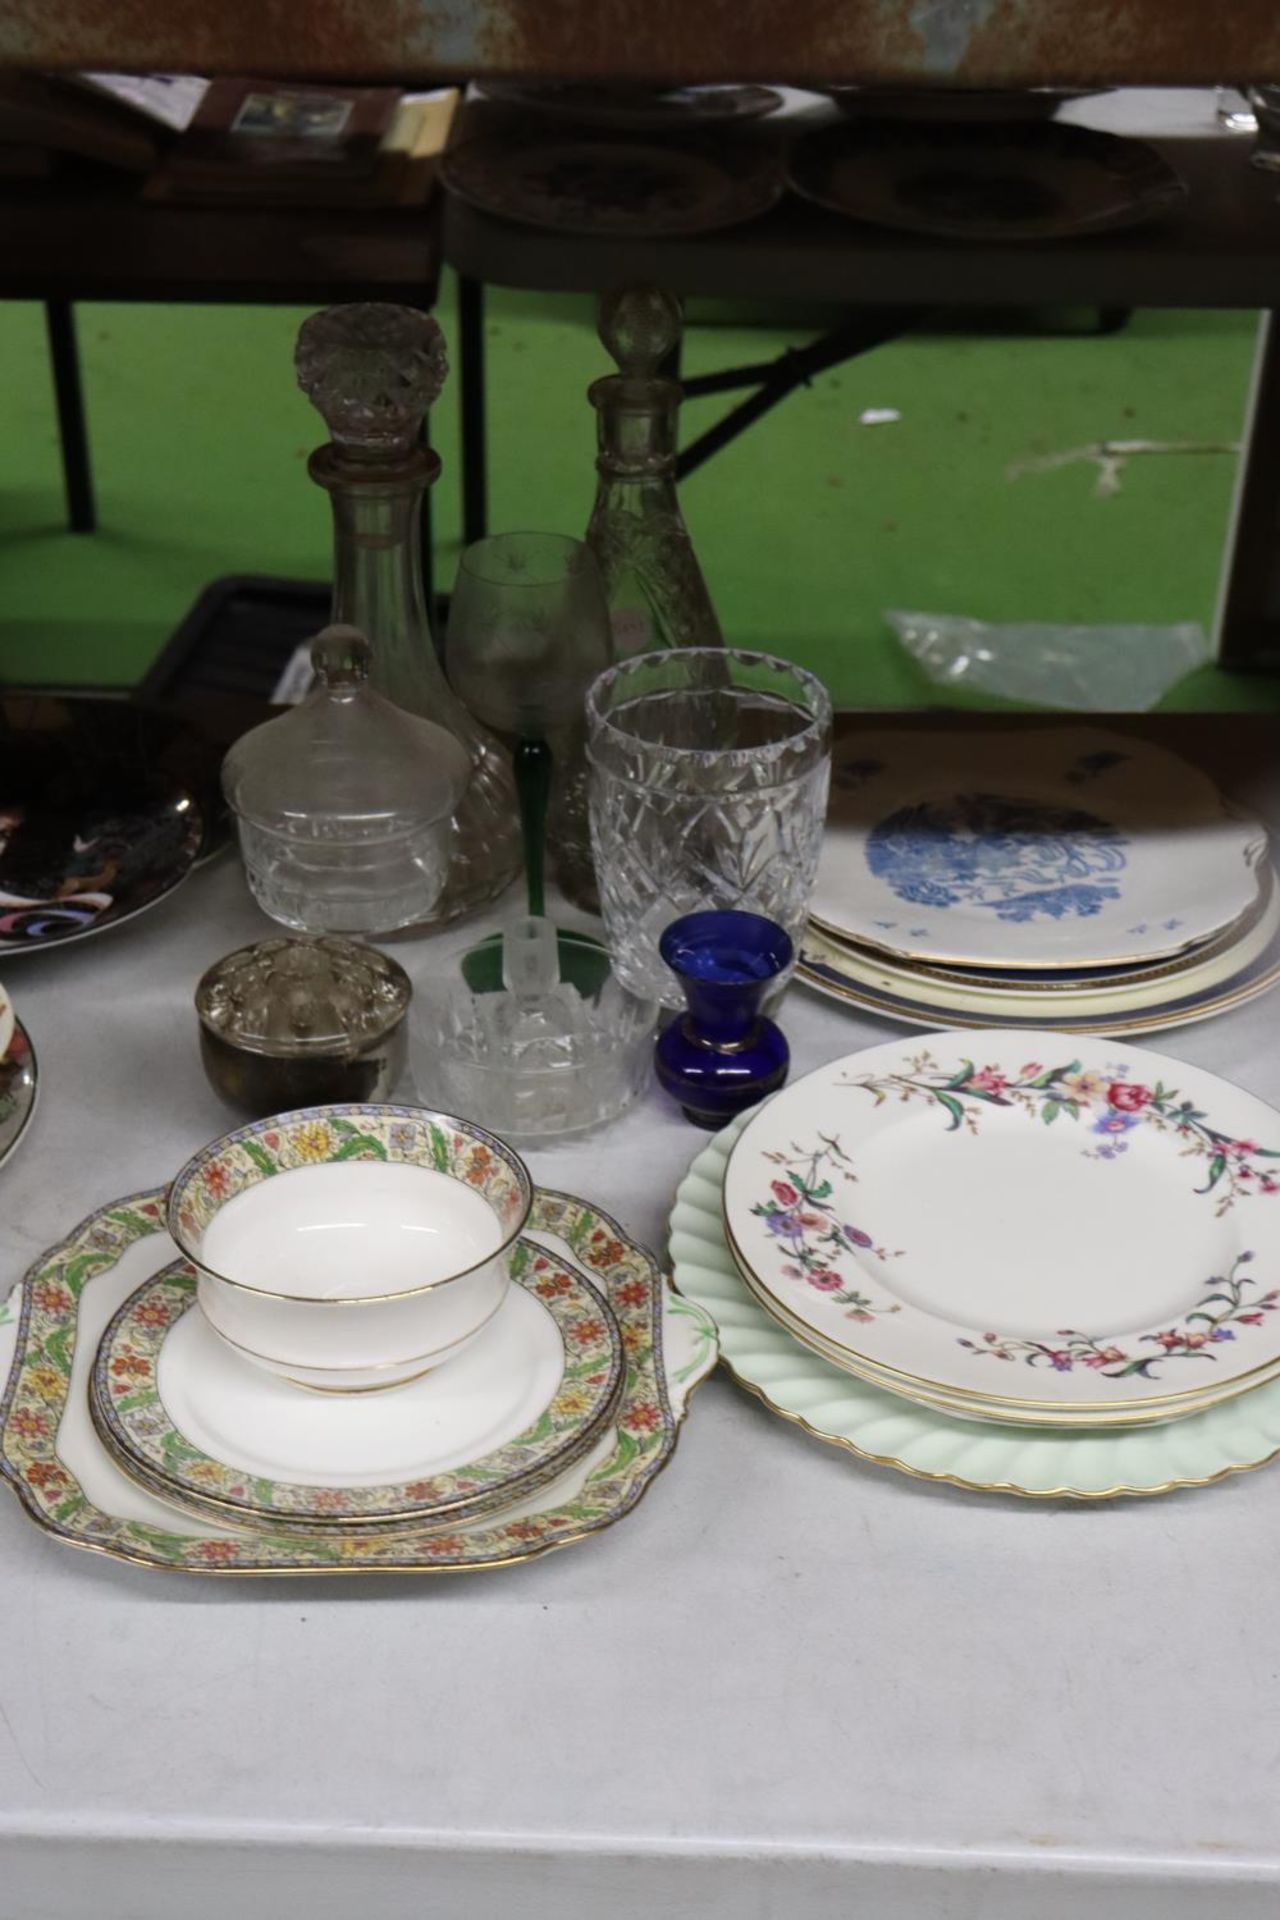 A MIXED LOT TO INCLUDE VINTAGE AYNSLEY CERAMICS, WEDGWOOD 'DEVON SPRAYS' PLATES, GLASS DECANTERS,